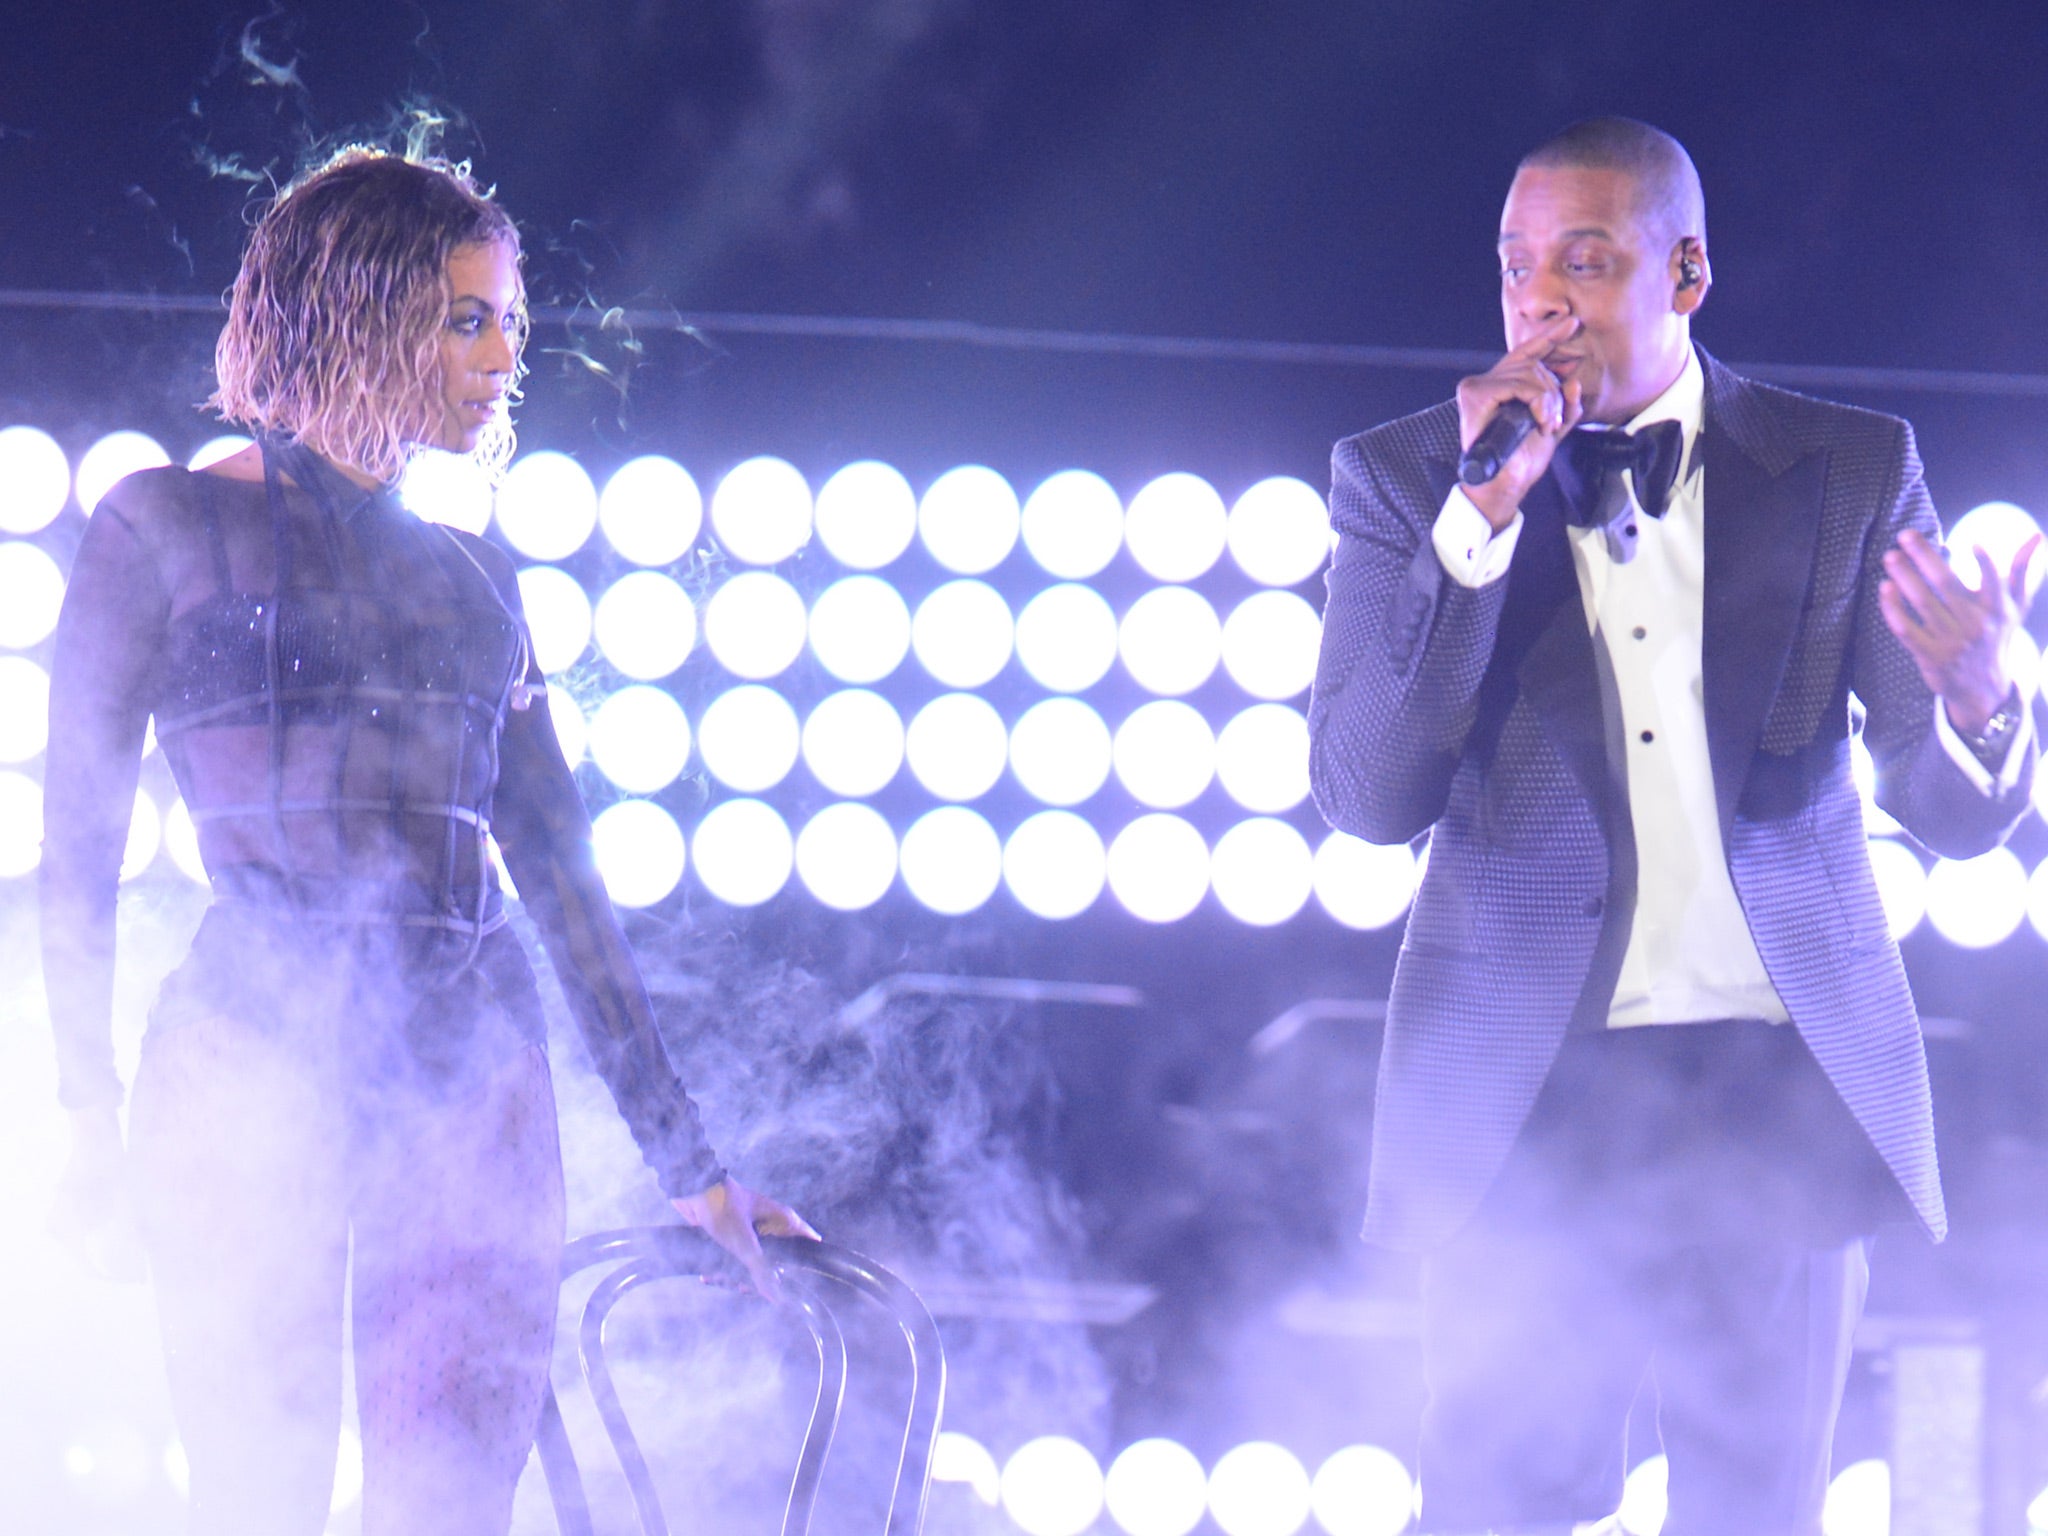 Beyonce and Jay-Z perform at the Grammys